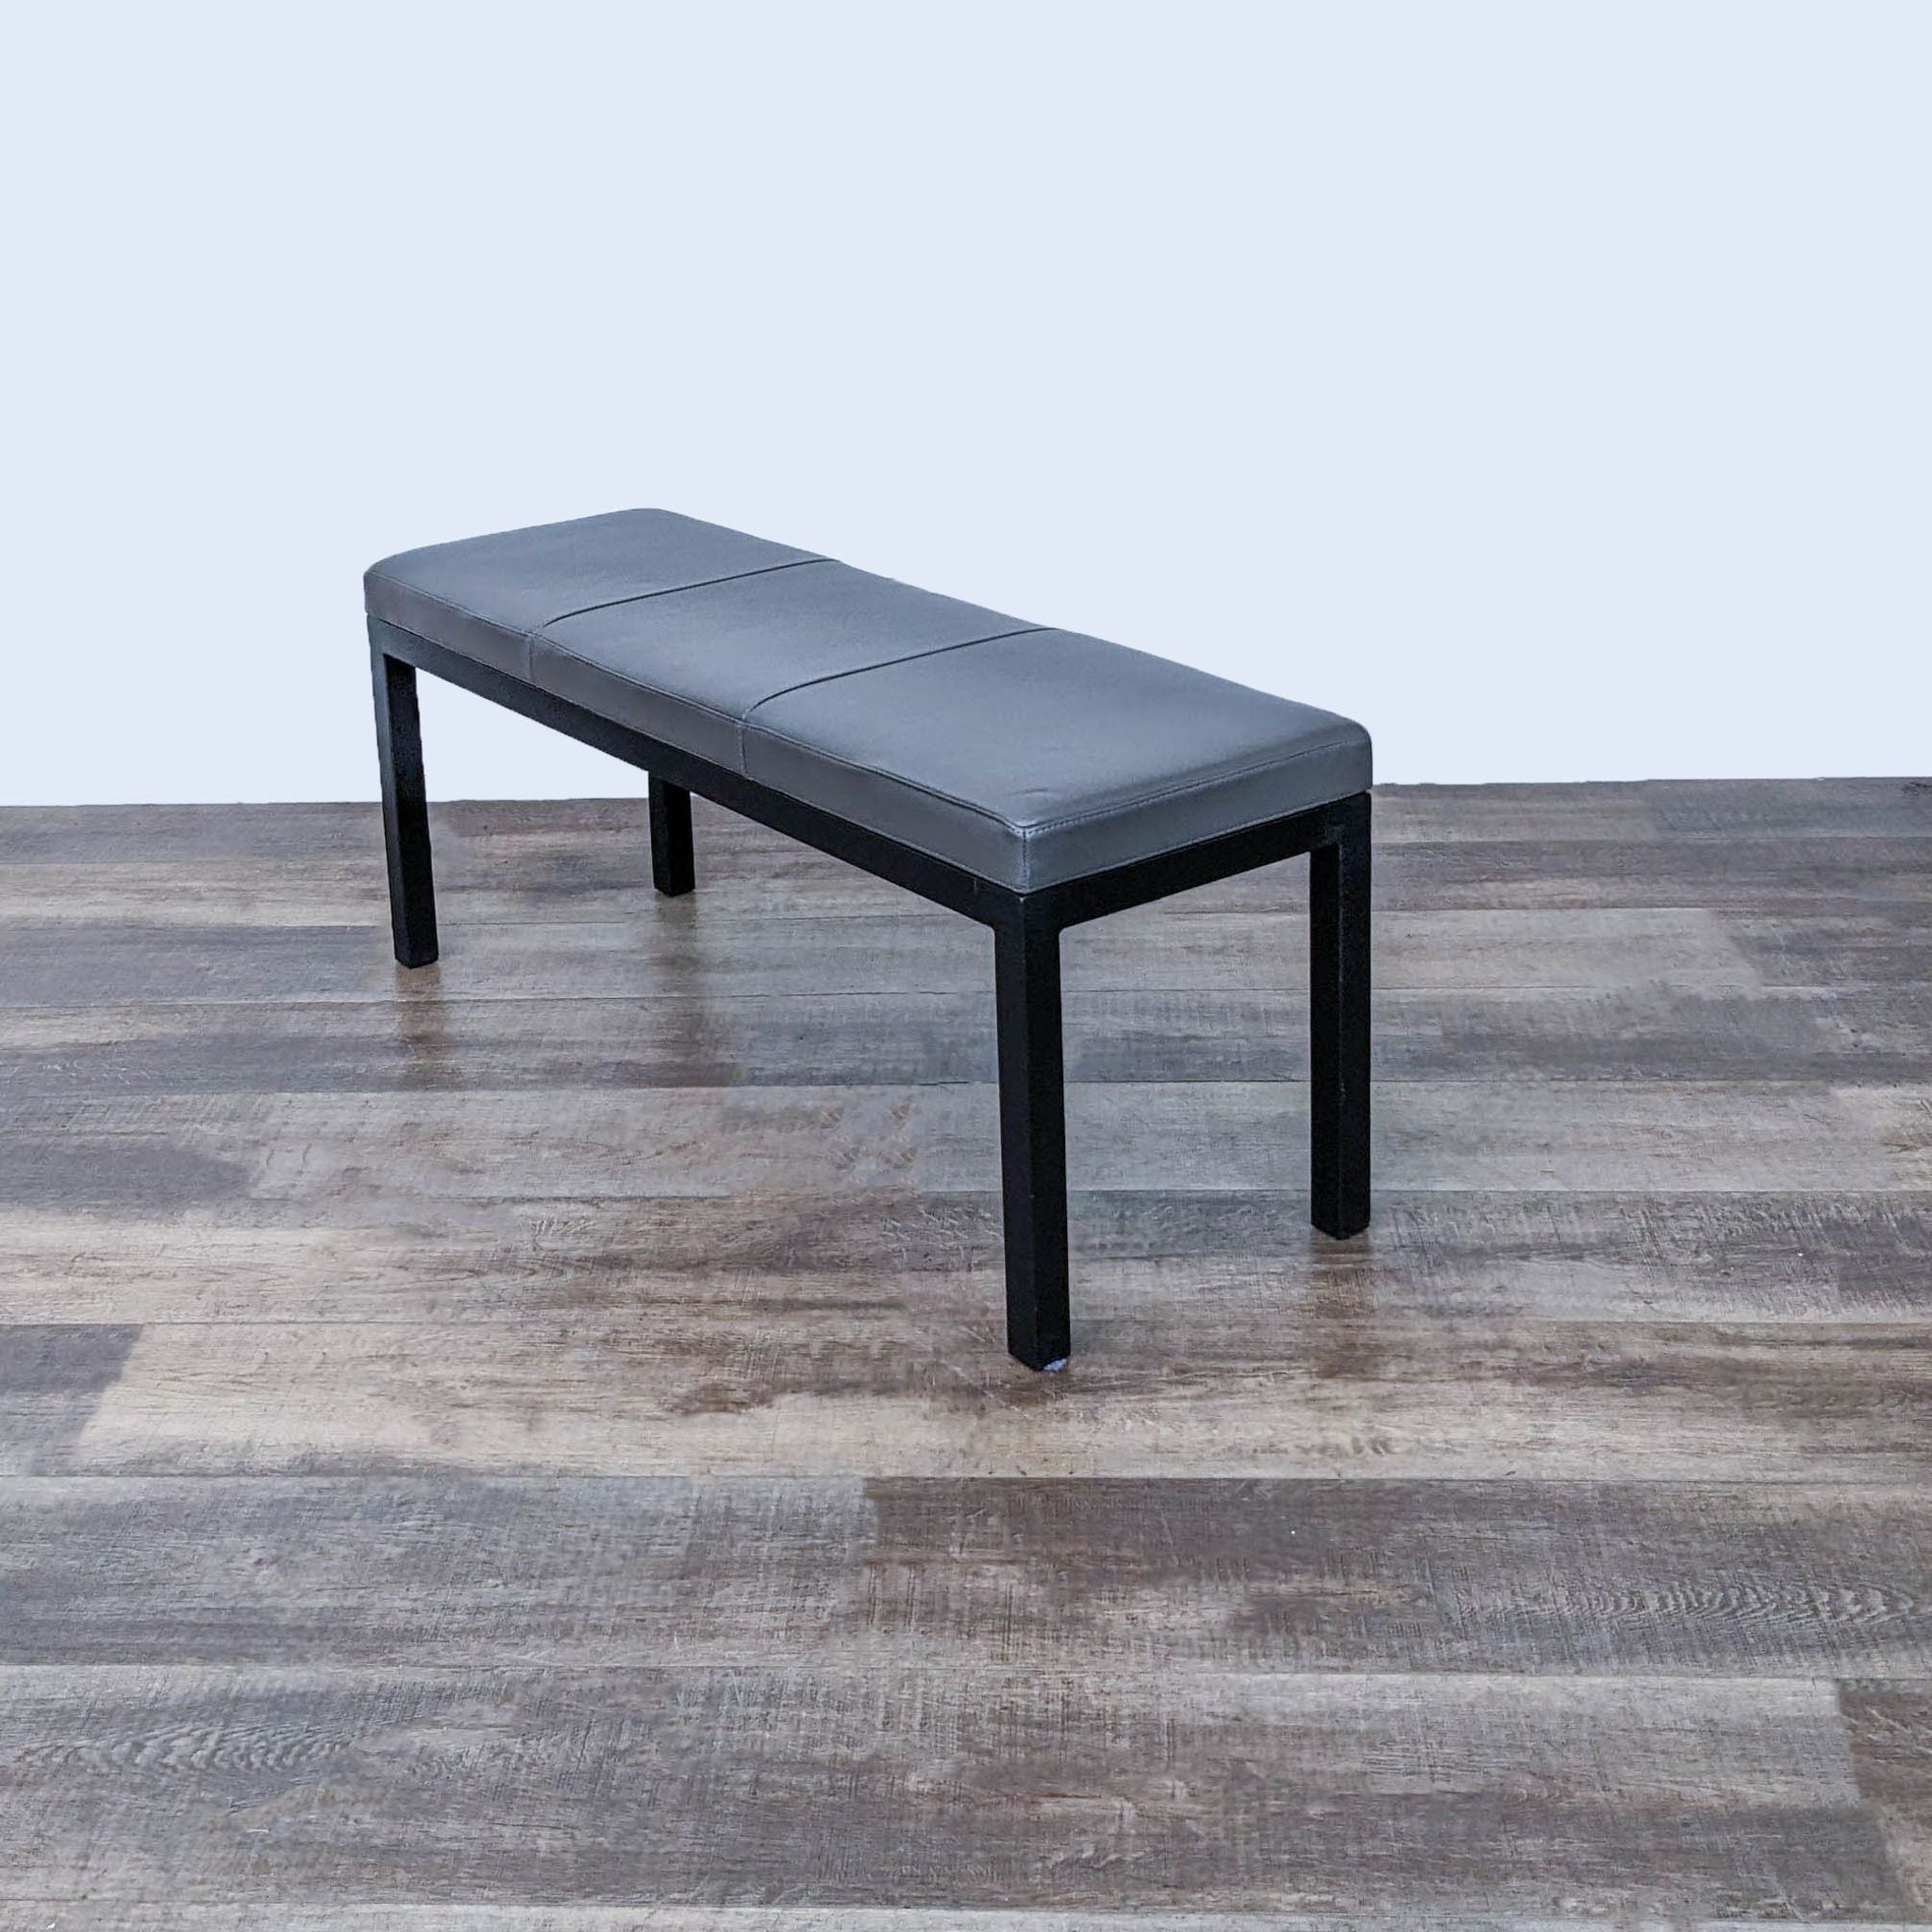 Sturdy Reperch bench featuring a simple design with a comfortable padded top.